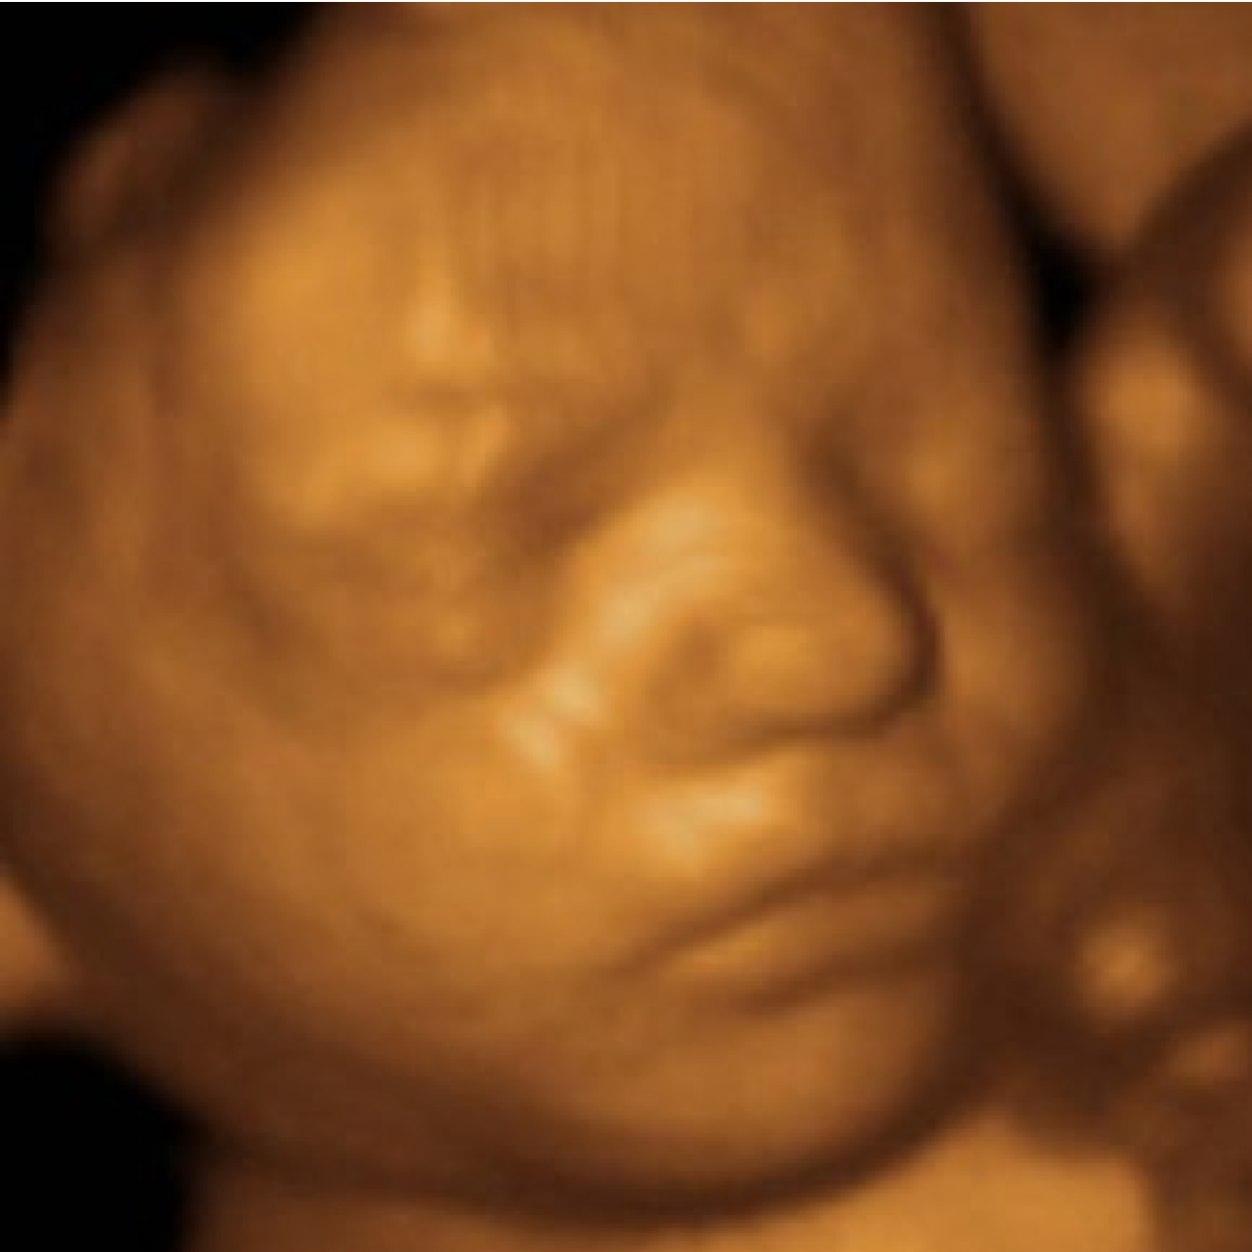 3d/4d ultrasounds. We can do gender checks too. Located in Ballwin, just 10 minutes from our previous Fenton location.